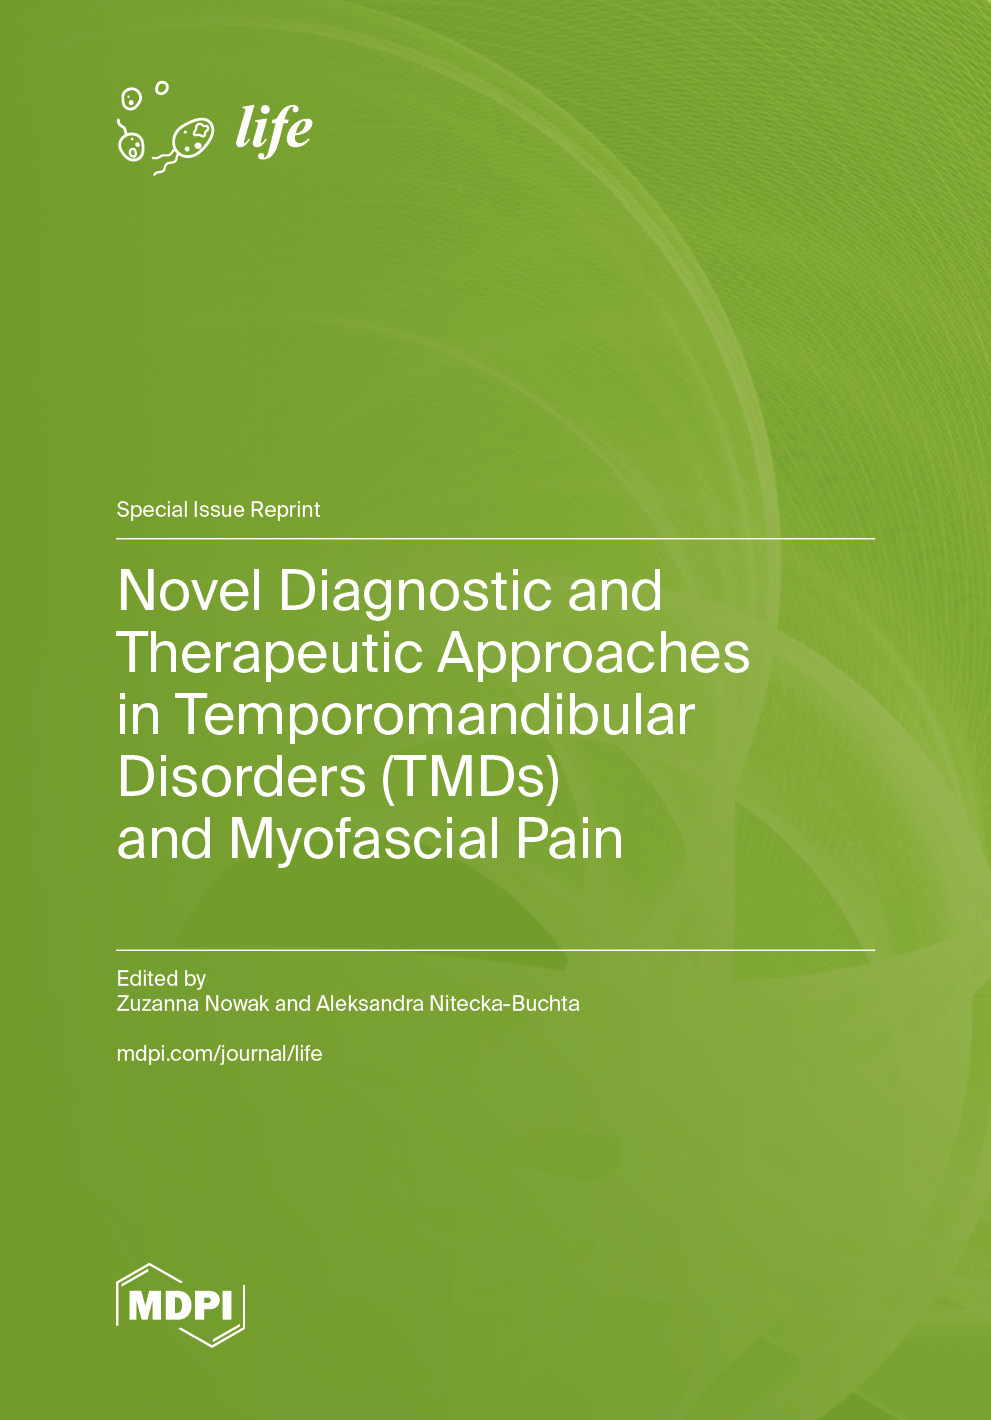 Special issue Novel Diagnostic and Therapeutic Approaches in Temporomandibular Disorders (TMDs) and Myofascial Pain book cover image